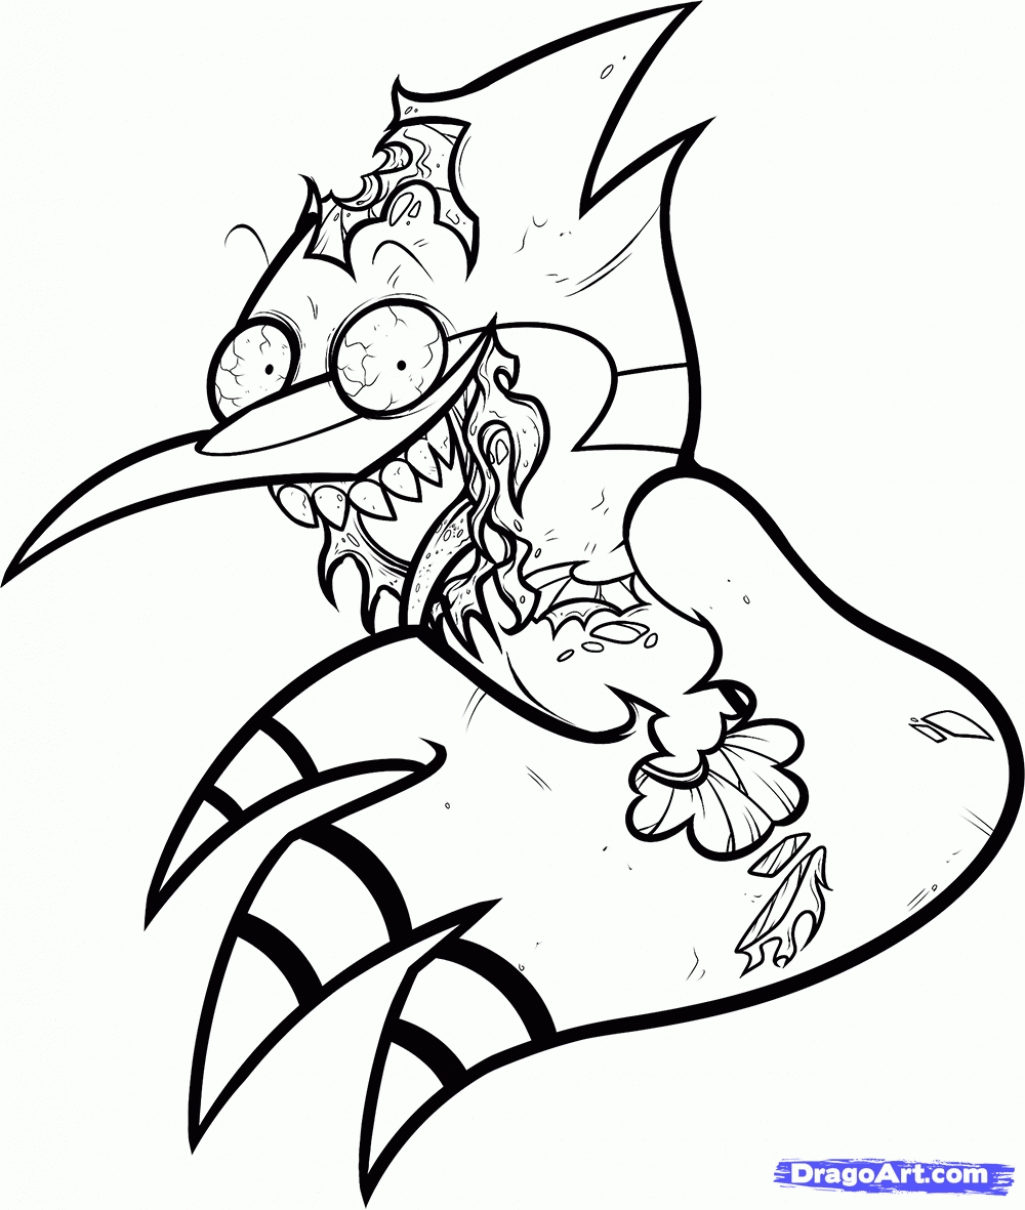 Free Coloring Pages Of Regular Show Mucsle Man Cartoon Network ...